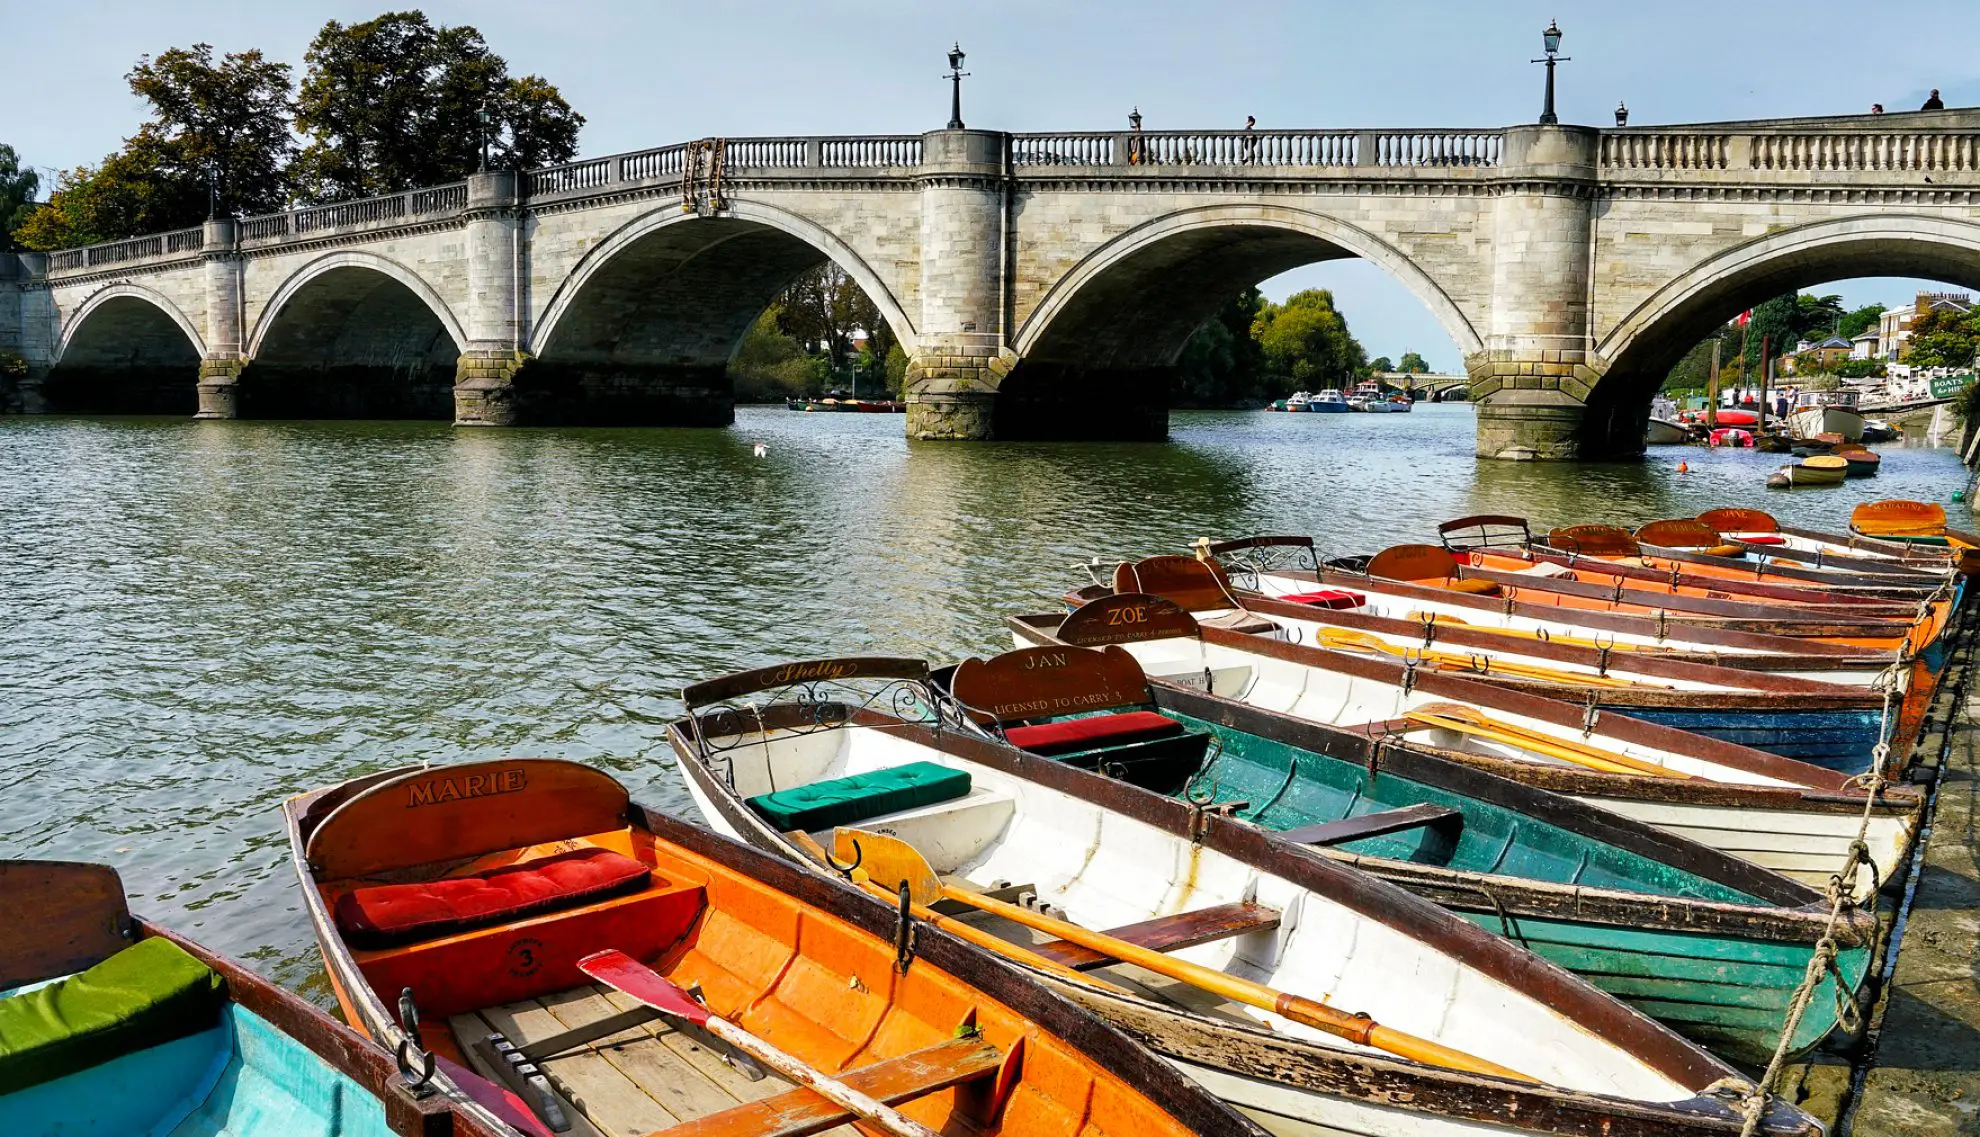 Richmond Bridge with rowing boats in the foreground